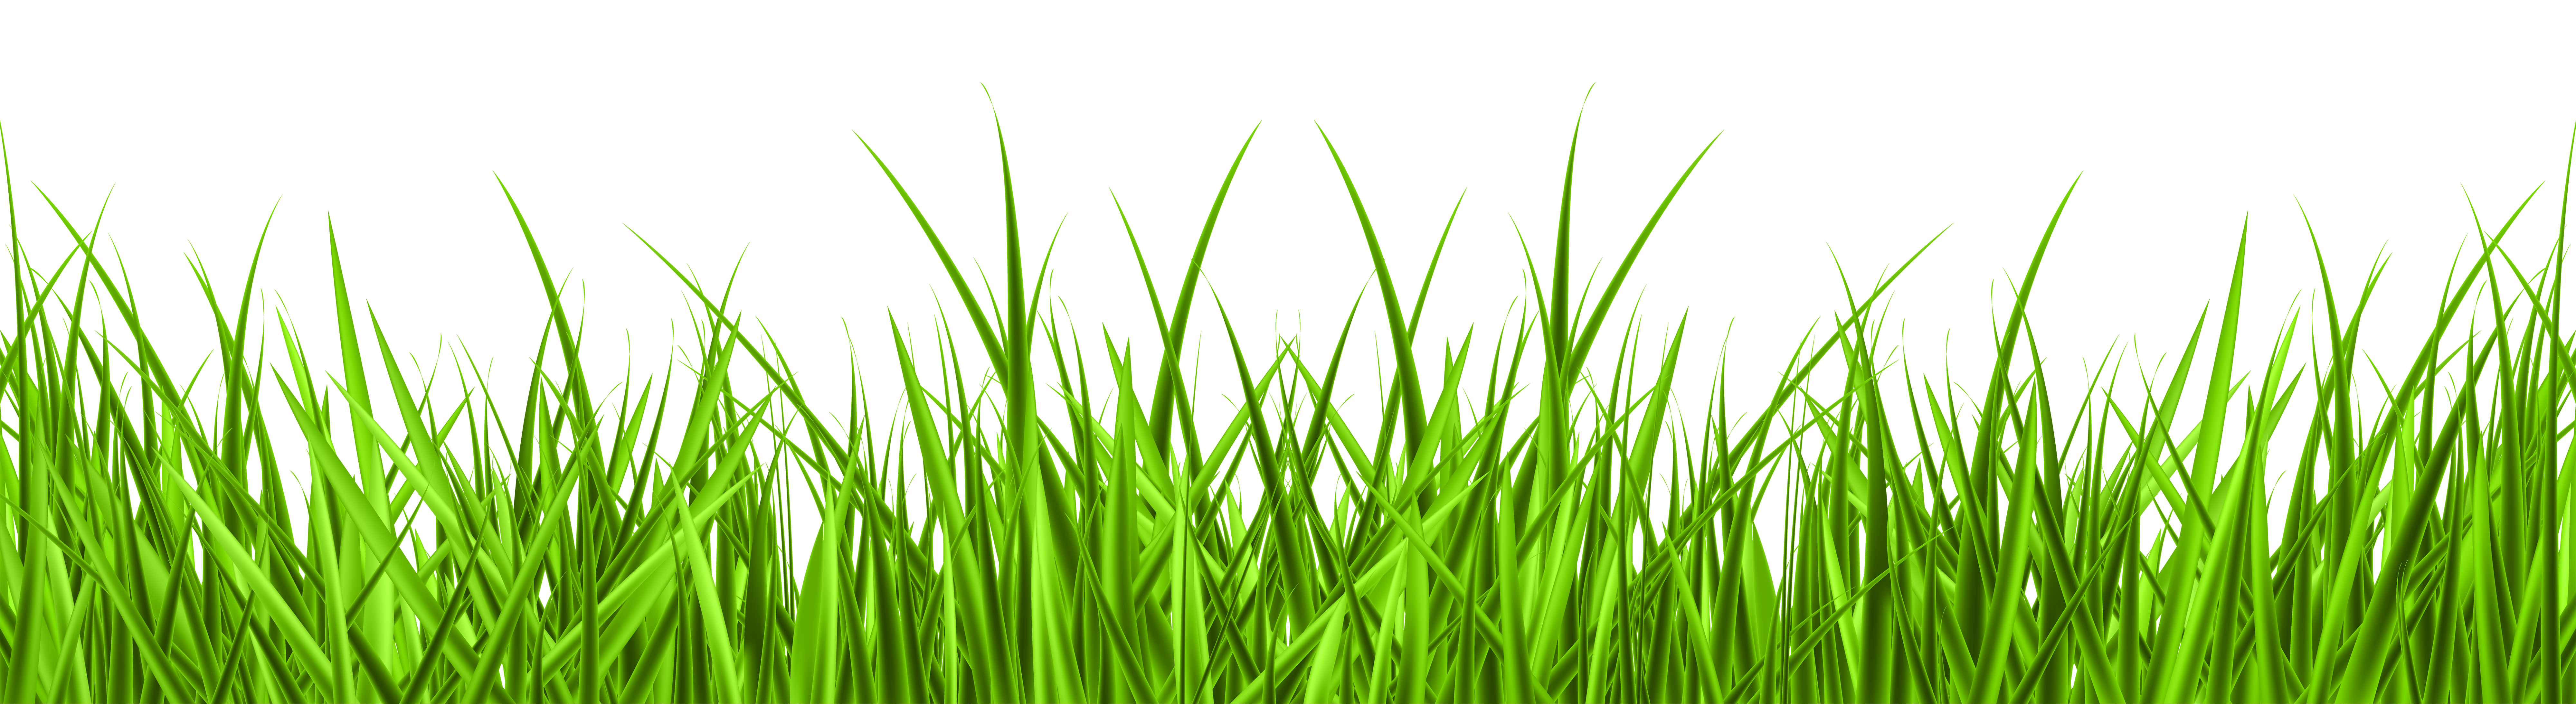 png clipart grass - photo #13